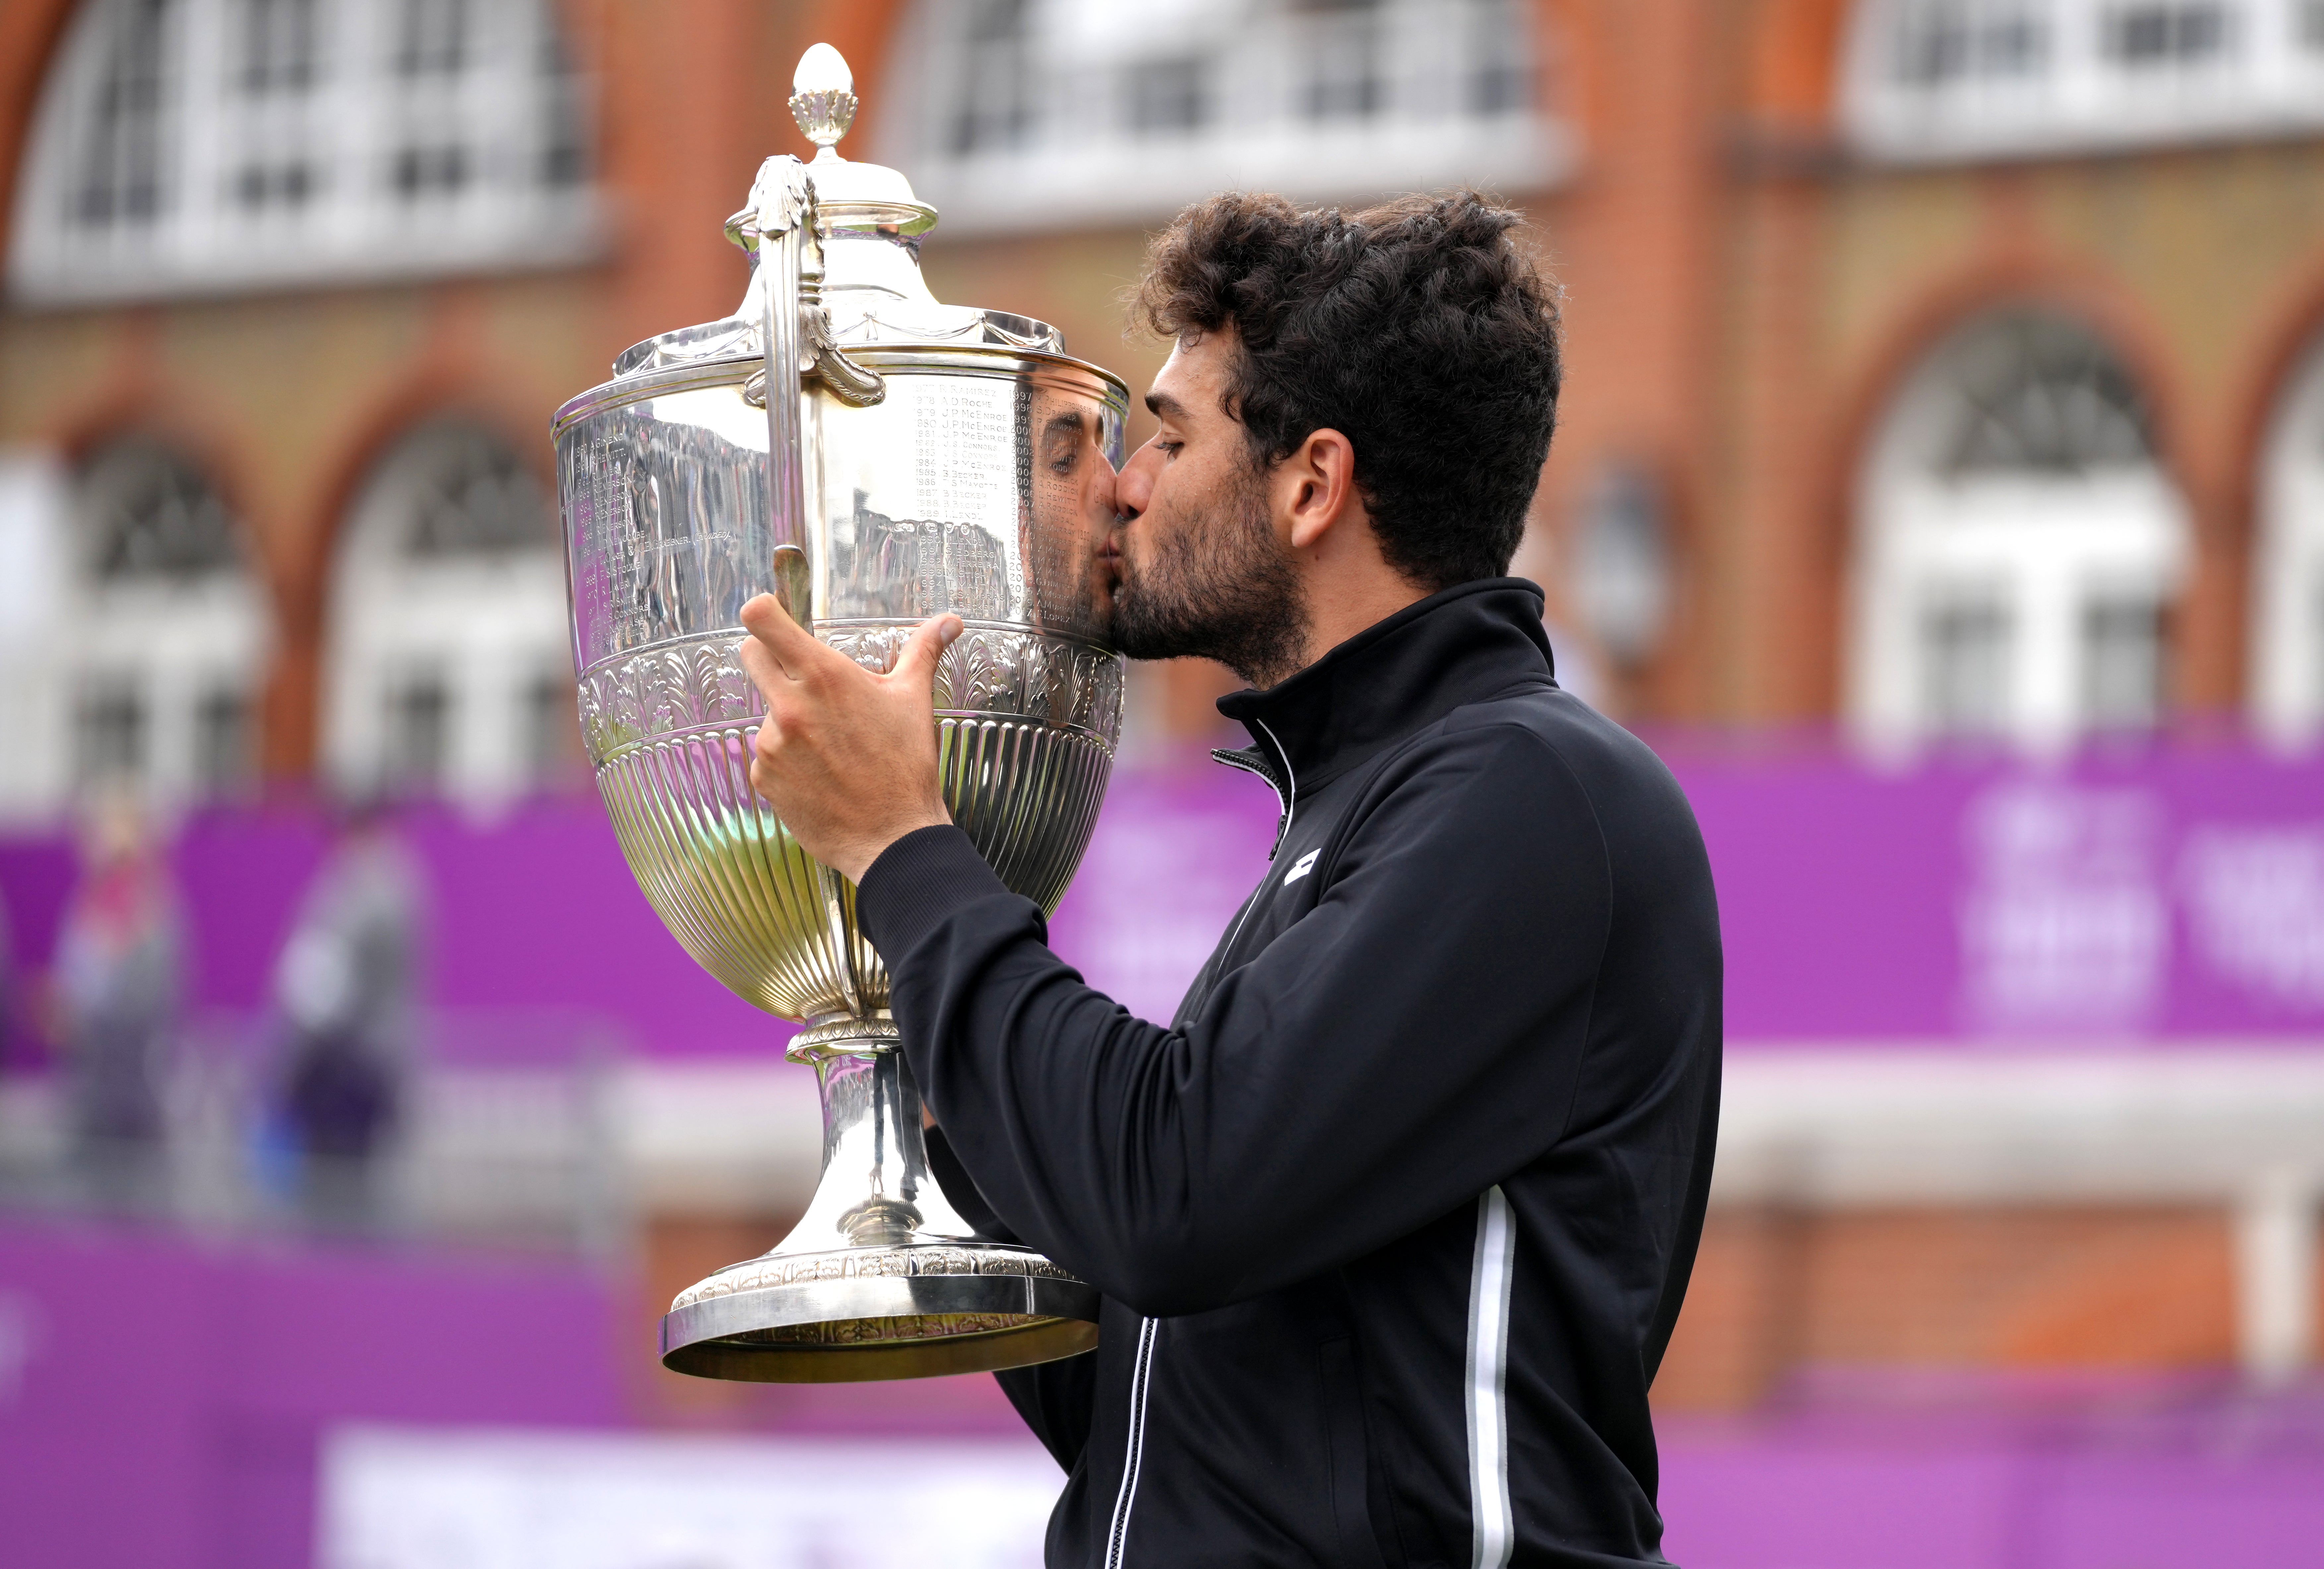 Matteo Berrettini win the title with a three-sets victory over Cameron Norrie